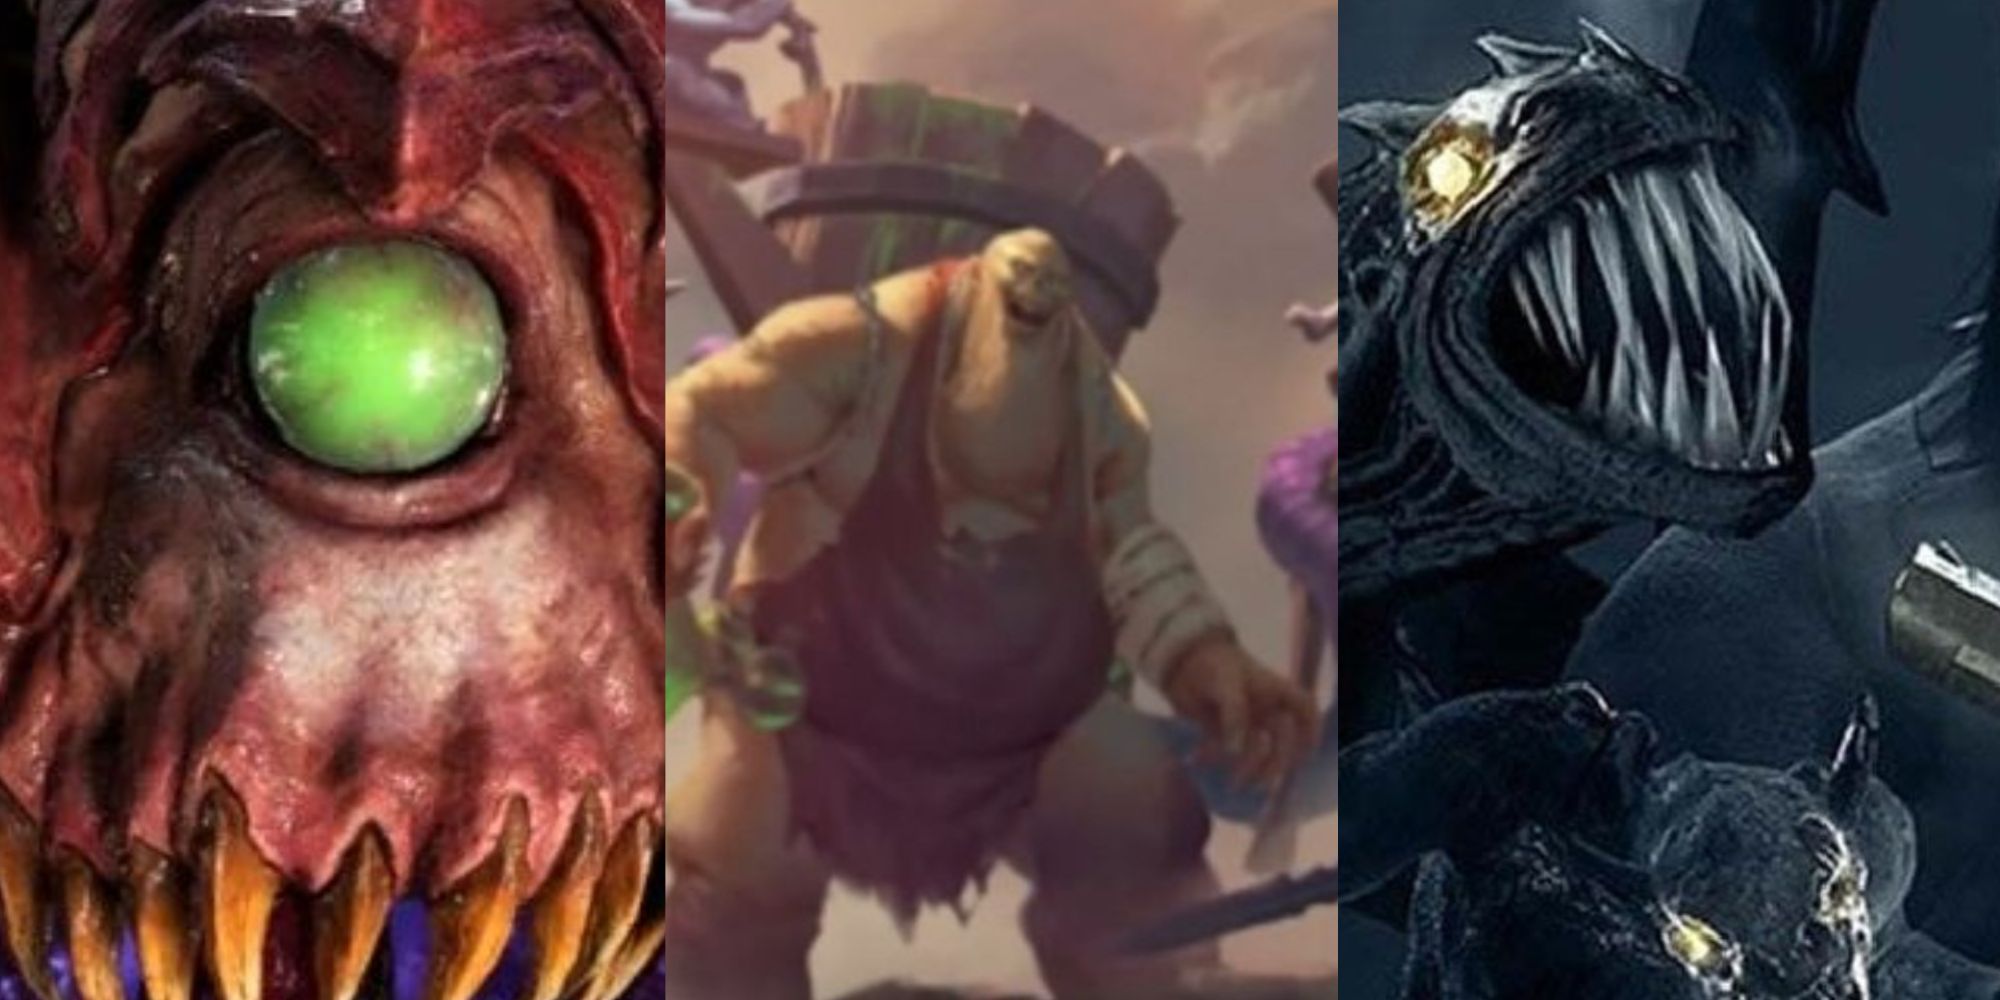 Collage image of demons in Total War Warhammer, The Darkness, and Doom.